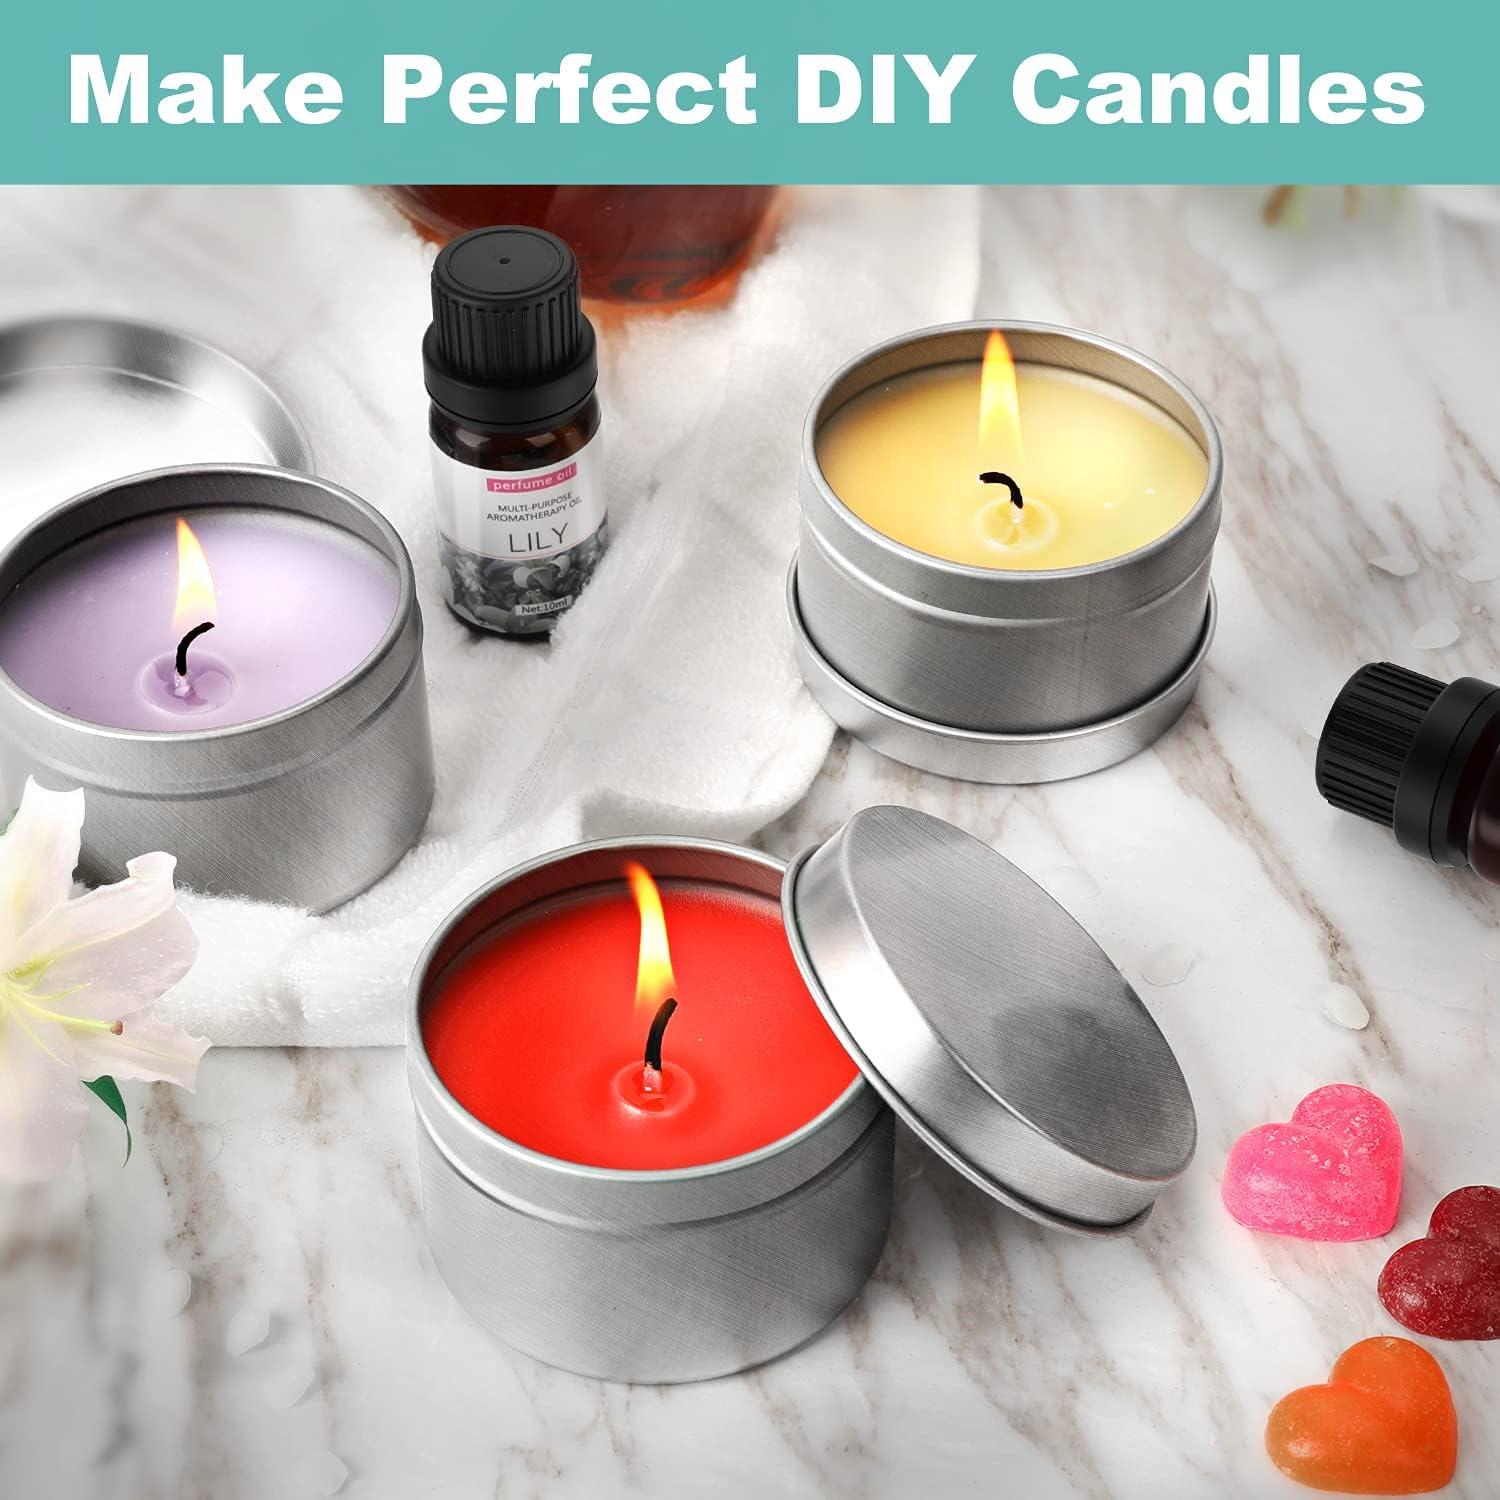 haccah complete candle making kit,candle making supplies,diy arts and  crafts kits for adults,beginners,kids including wax, wi